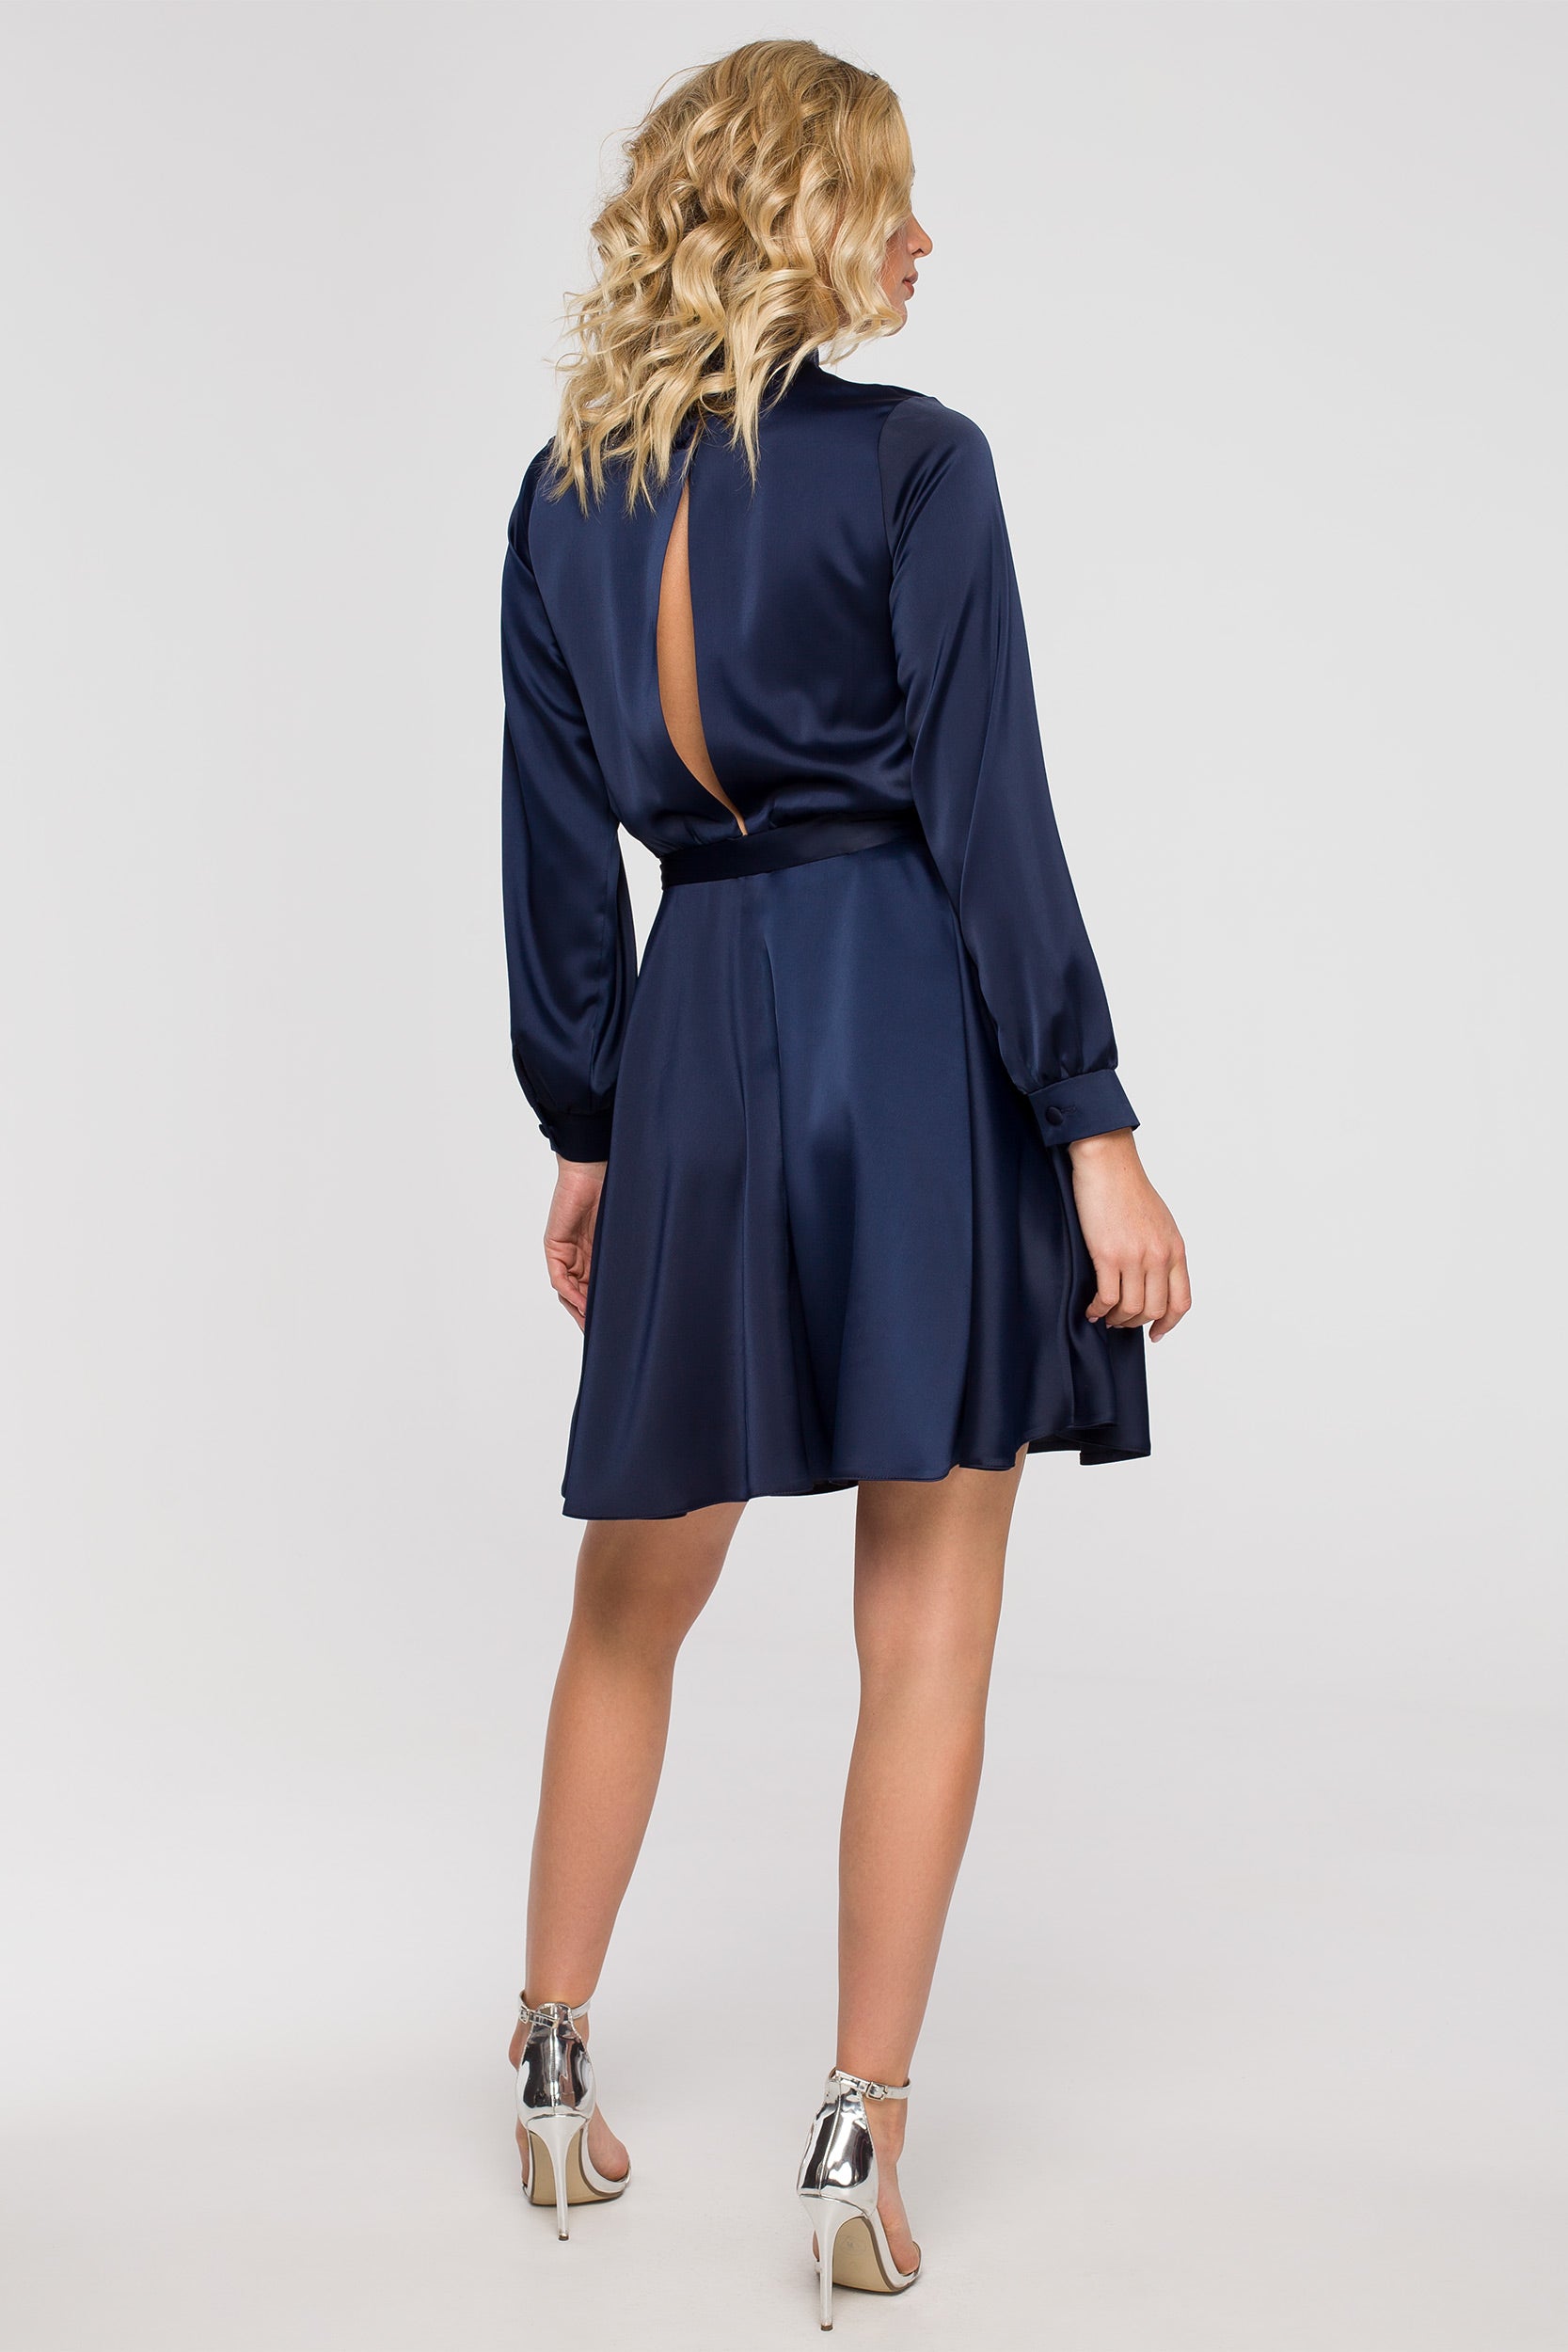 High-Neck Night Blue Satin Mini Dress | Strictly In | Make a statement in our versatile mini dress with a high neck, flared cut, and bishop sleeves. Perfect for turning heads at festive gatherings.